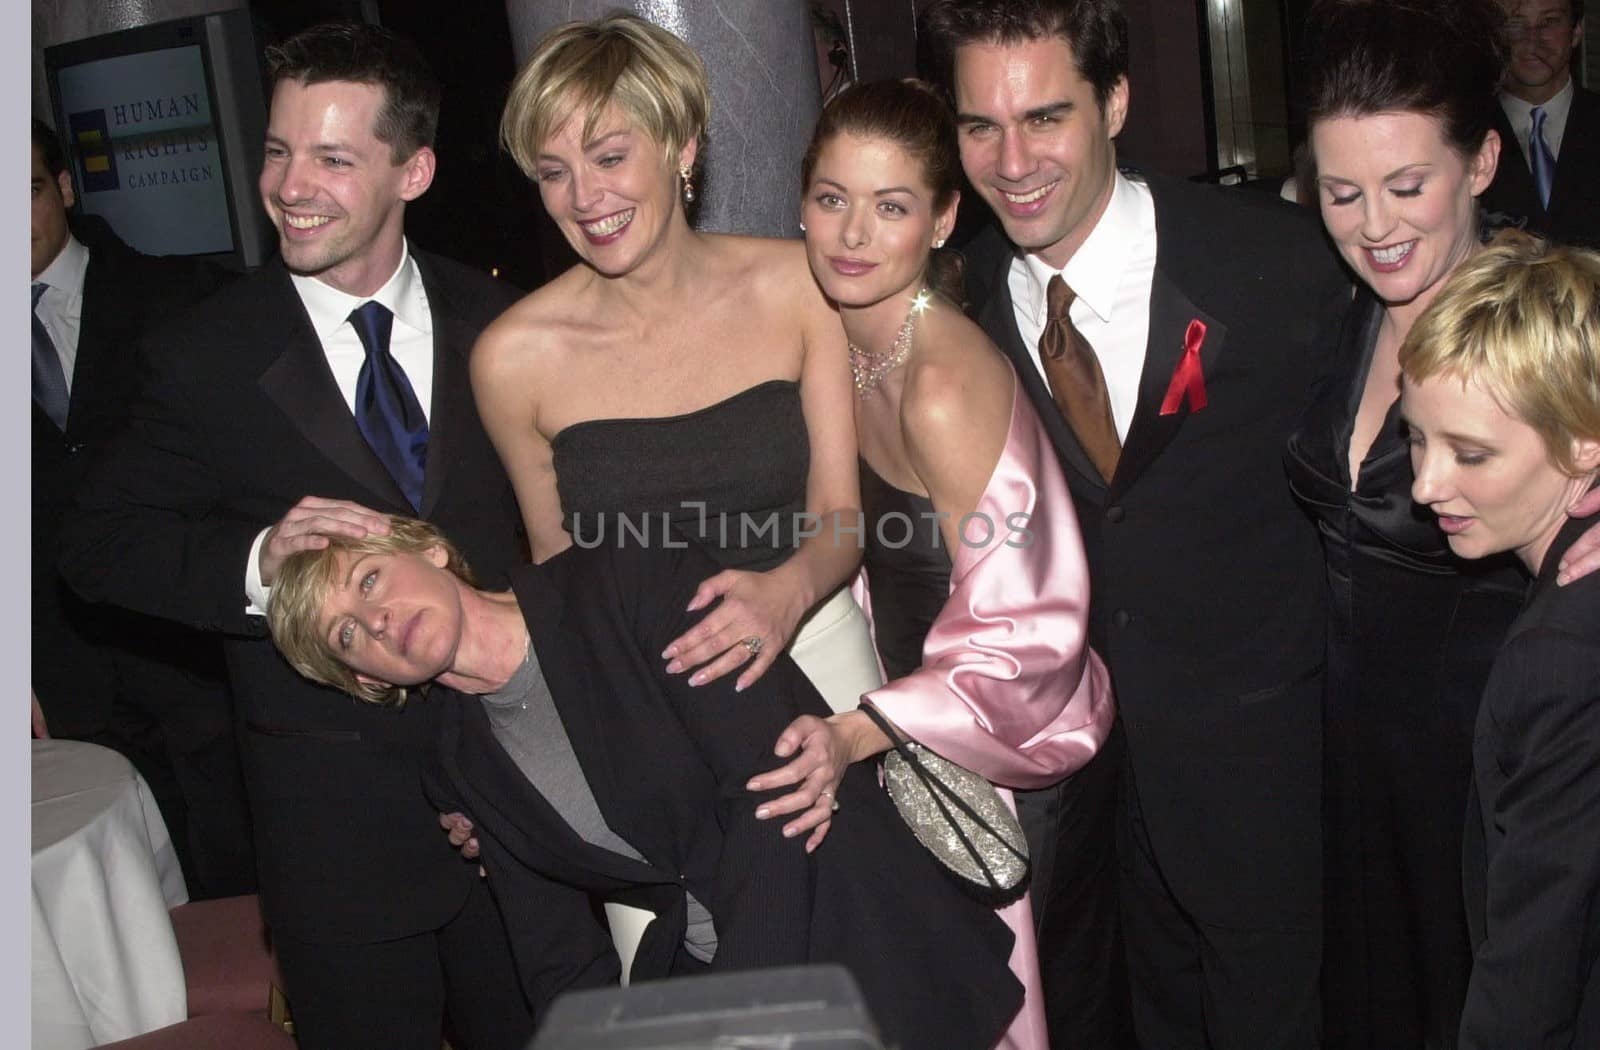 Sean Hayes, Sharon Stone, Debra Messing, Eric McCormack, Megan Mullally, Anne Heche and Ellen Degeneres at the Human Rights Campaign Gala, 02-19-00